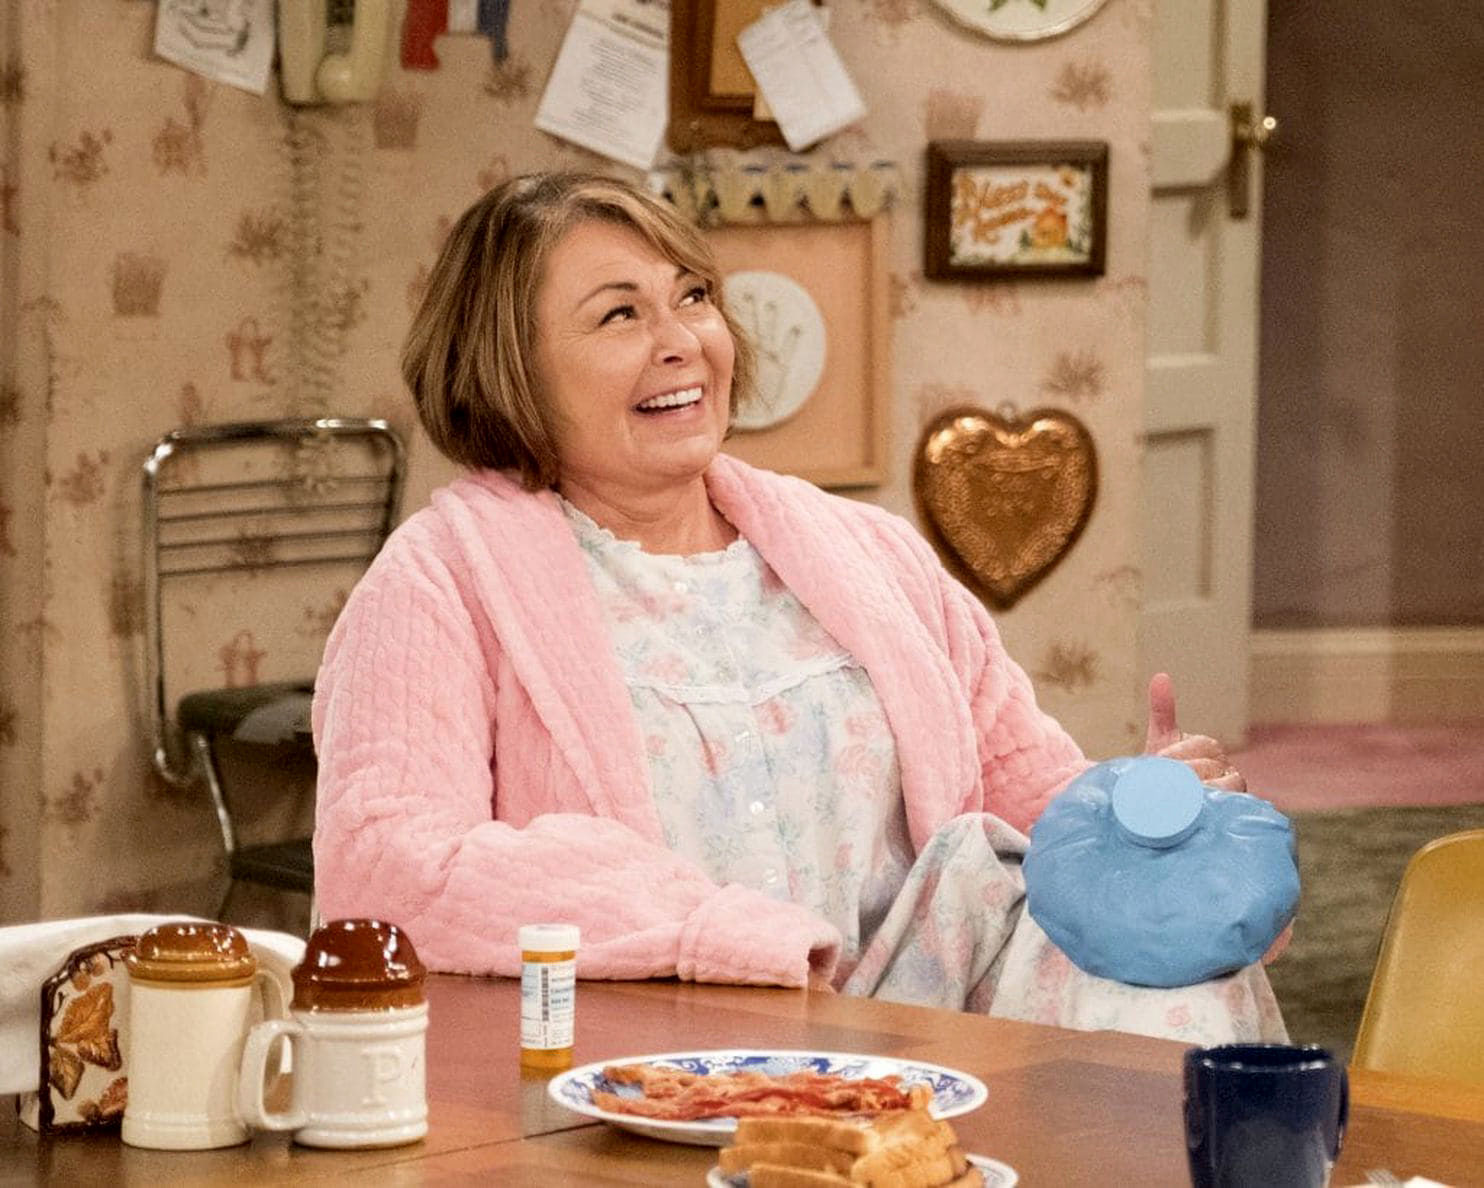 Racism is not a known side effect, Ambien maker says after Roseanne blames it for tweets Lifestyle postguam photo